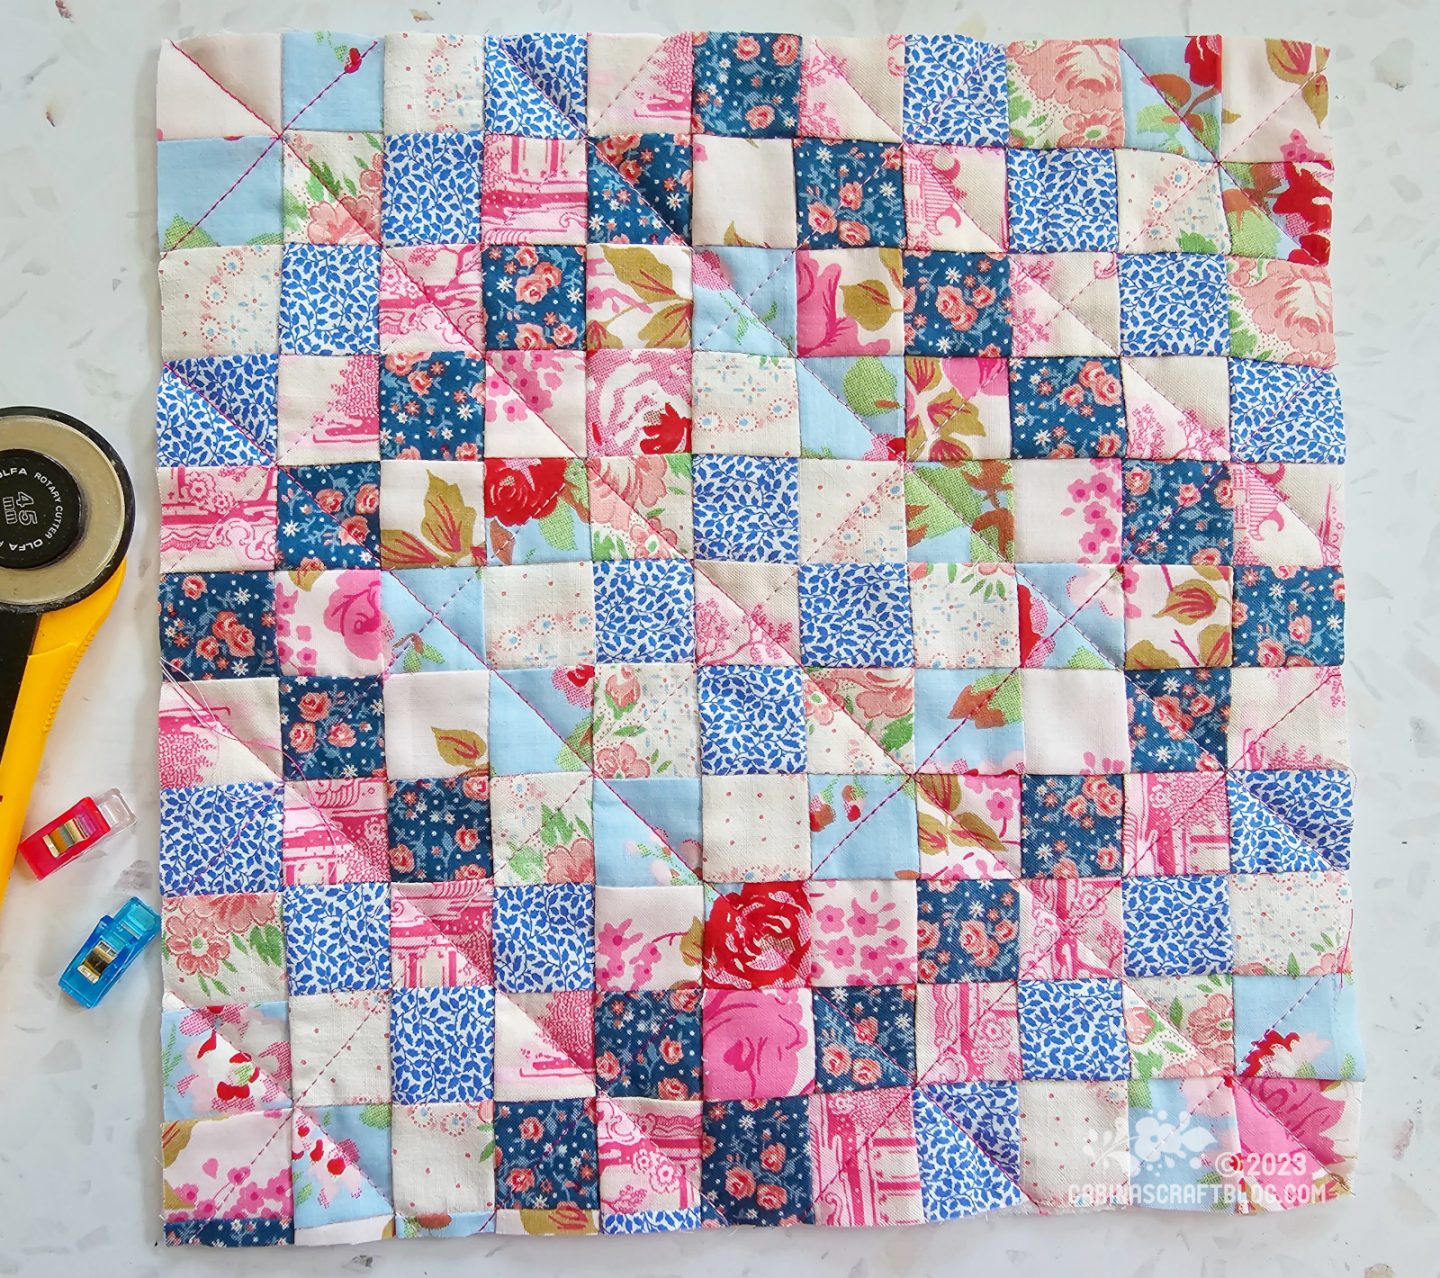 Small square quilt made of small squares pieced together to make a set of ever expanding boxes in pink and blue colours.